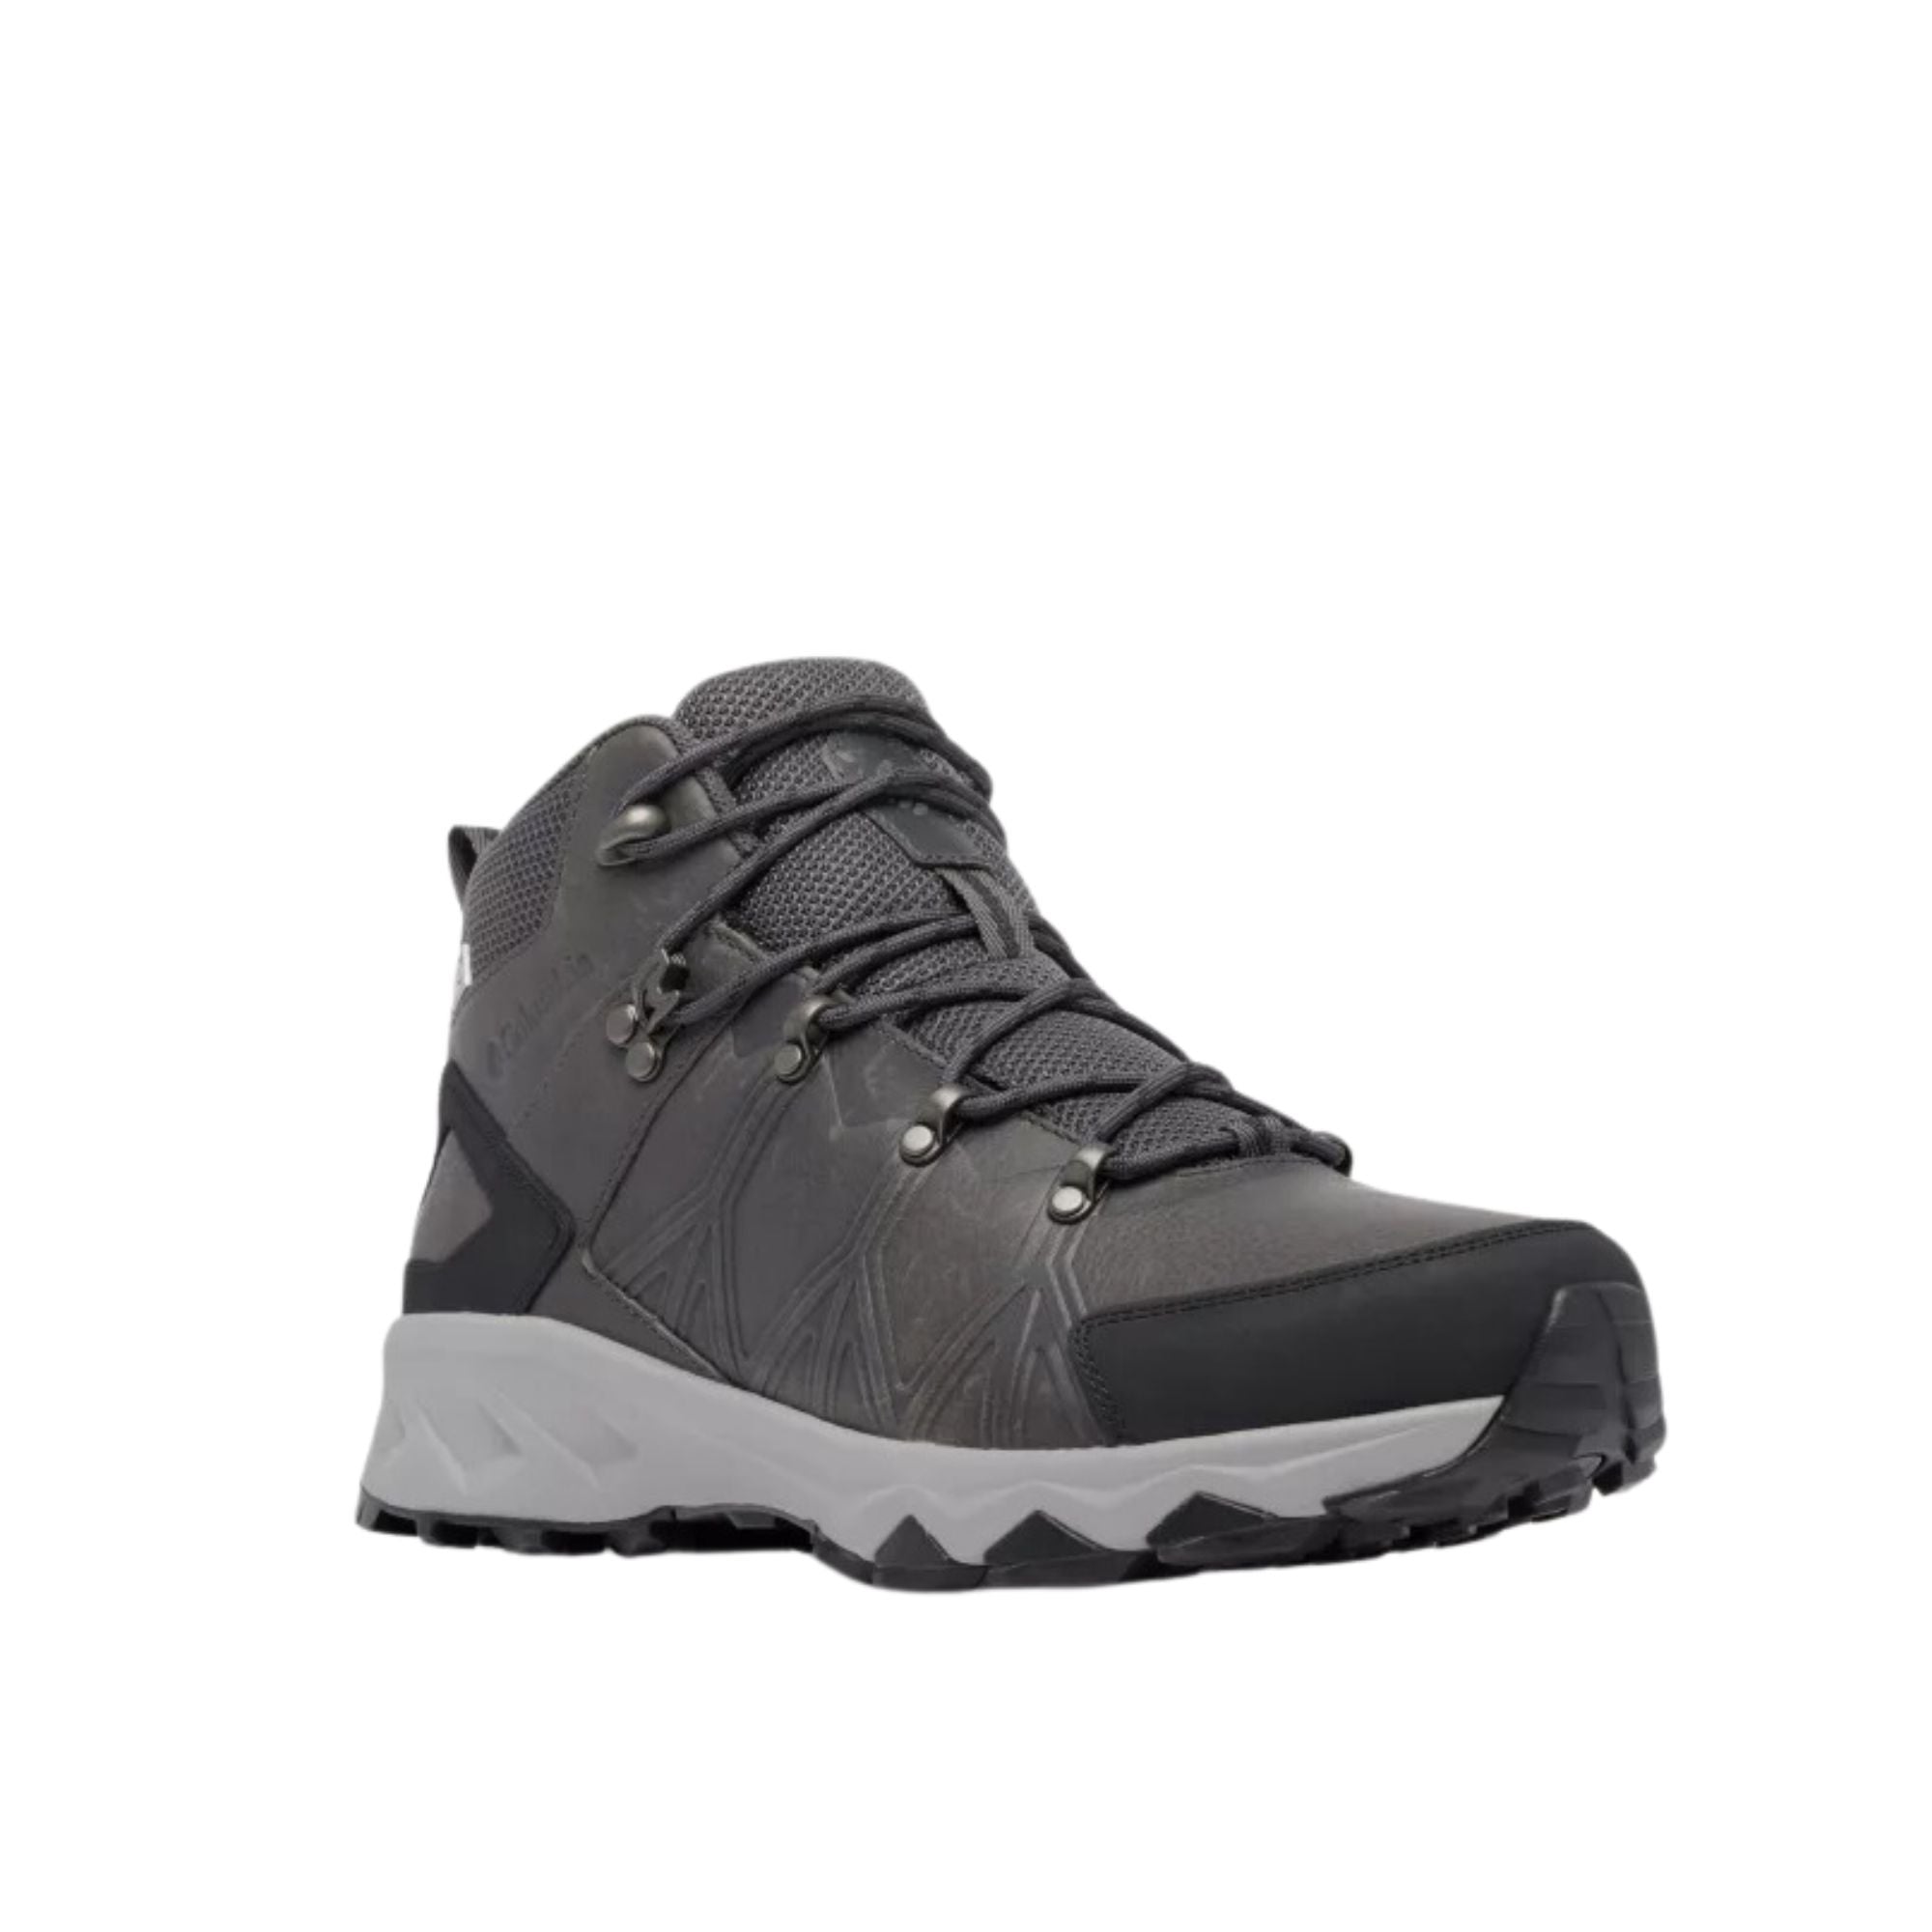 Columbia Men's Peakfreak II Mid Outdry Waterproof Leather Hiking Boots | Columbia | Portwest - The Outdoor Shop